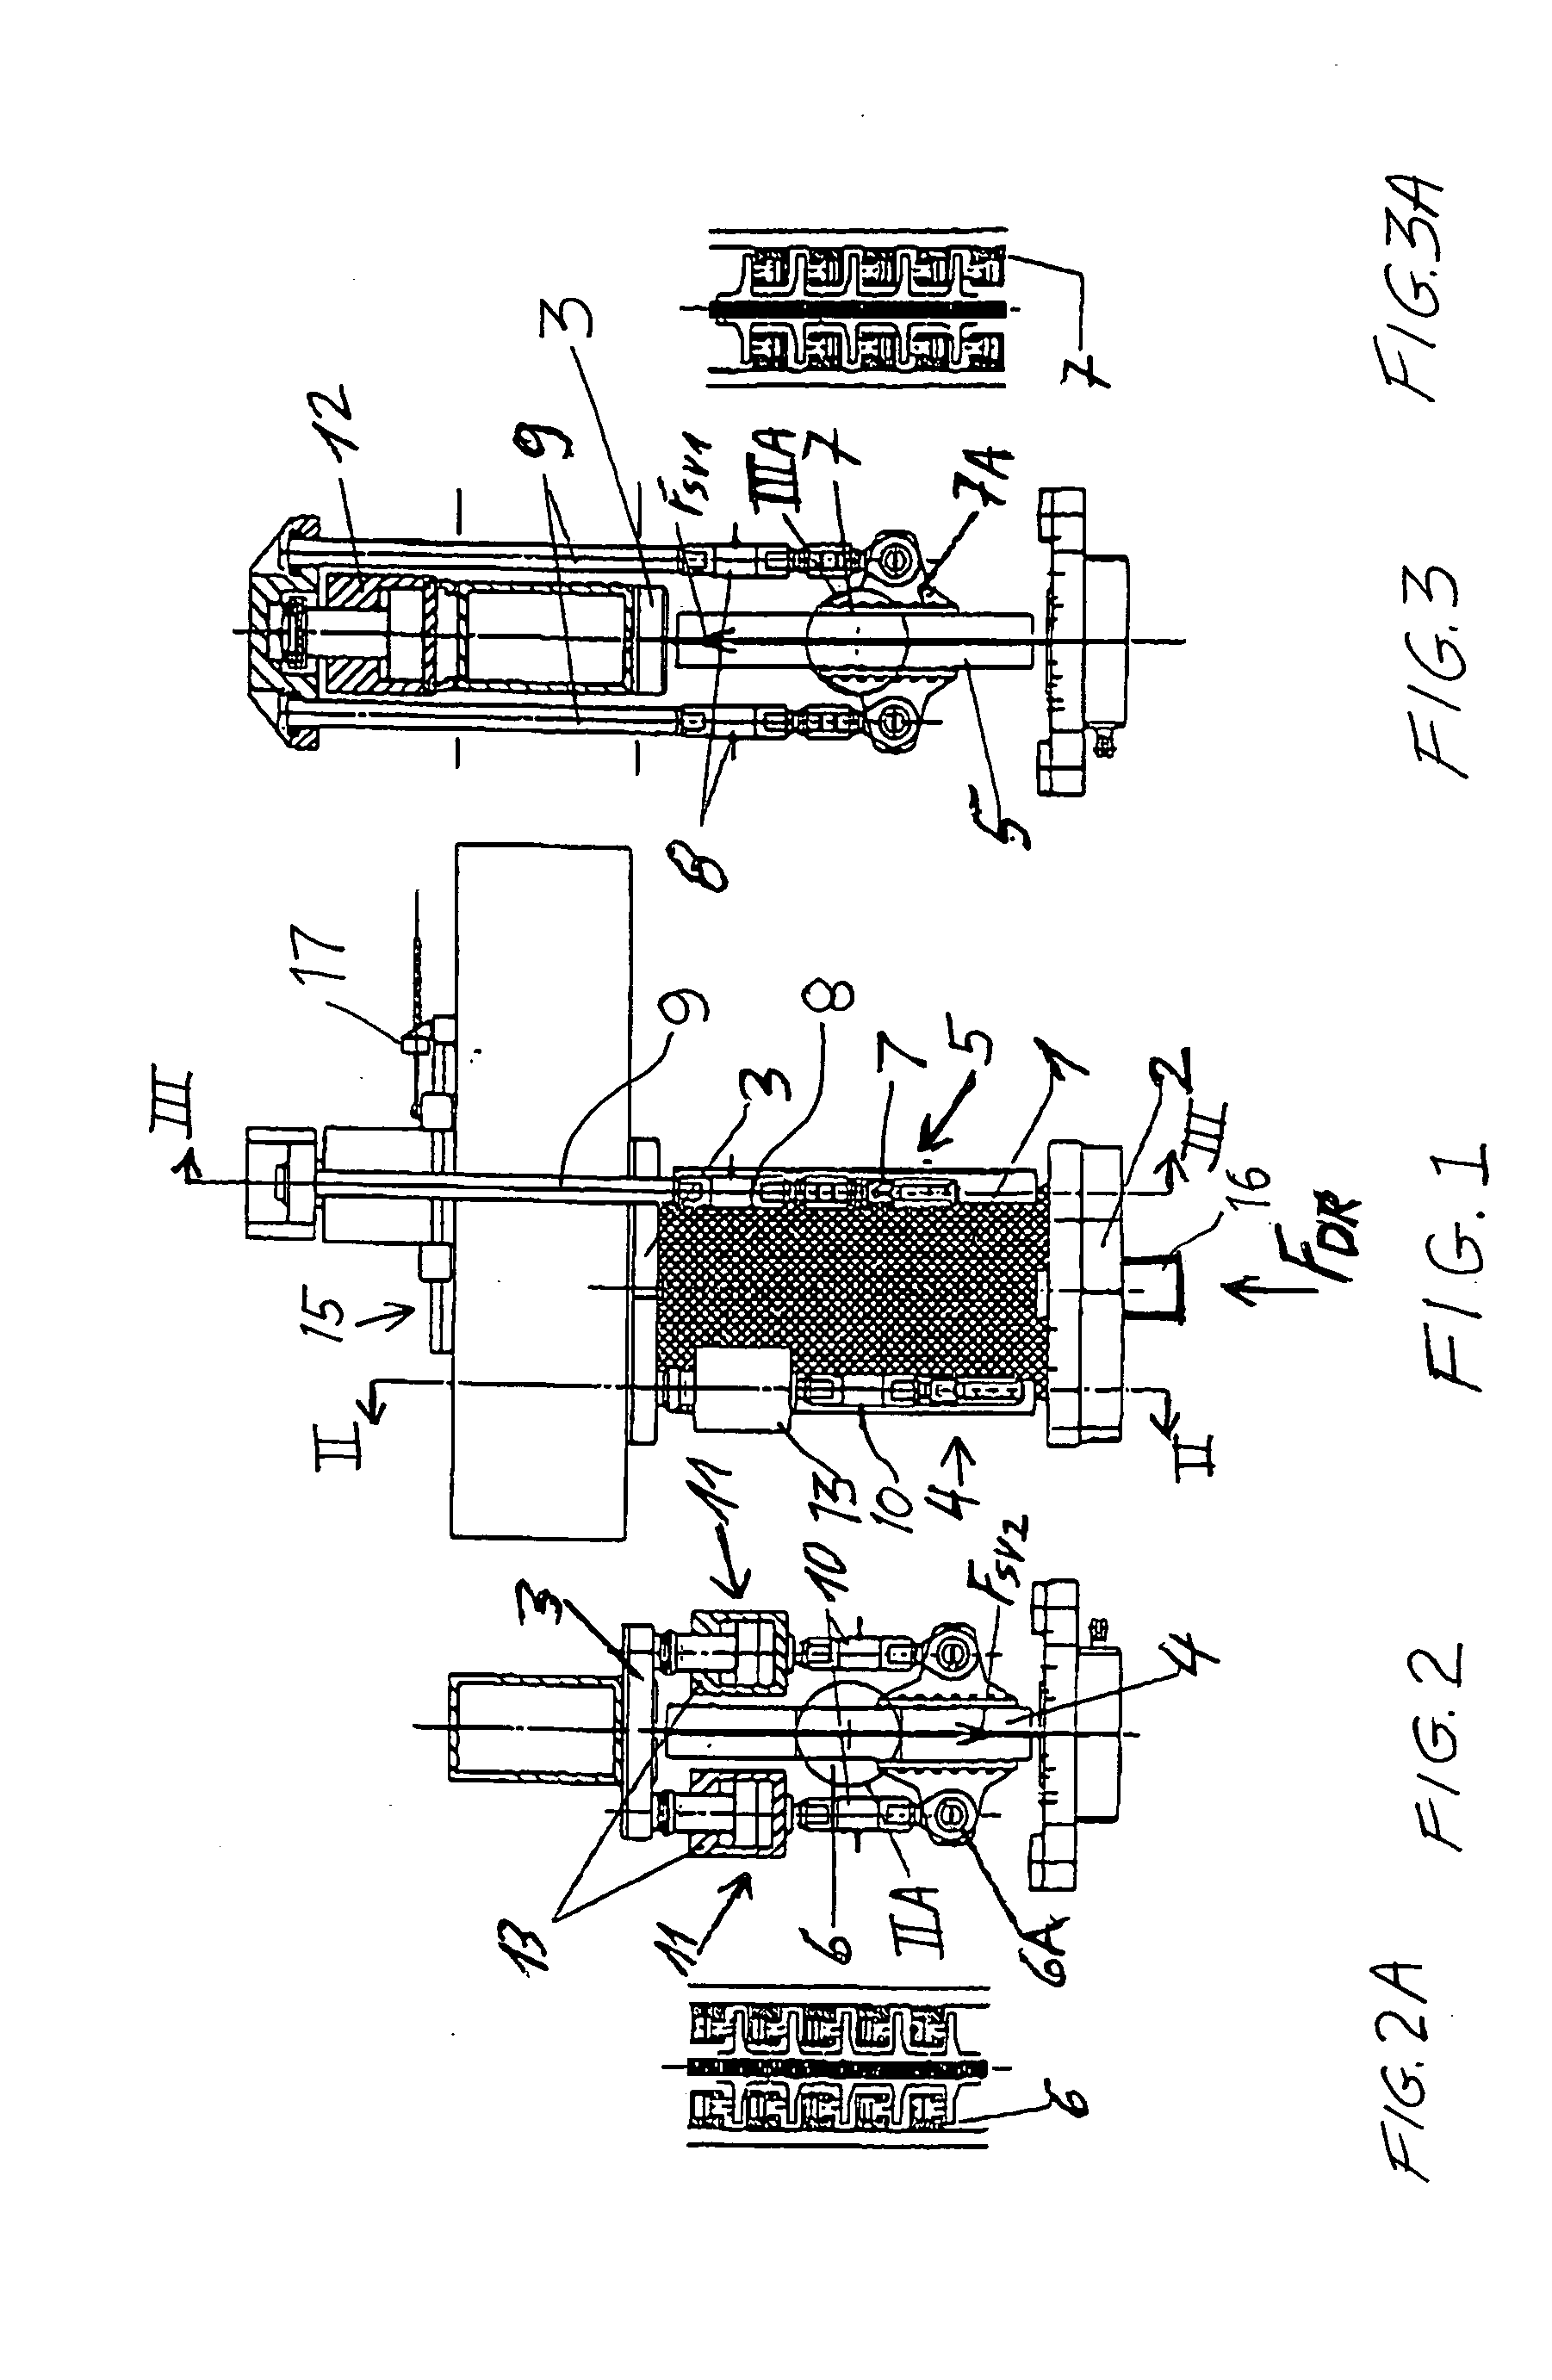 Testing apparatus for compression and shear testing of a test component such as a curved aircraft component